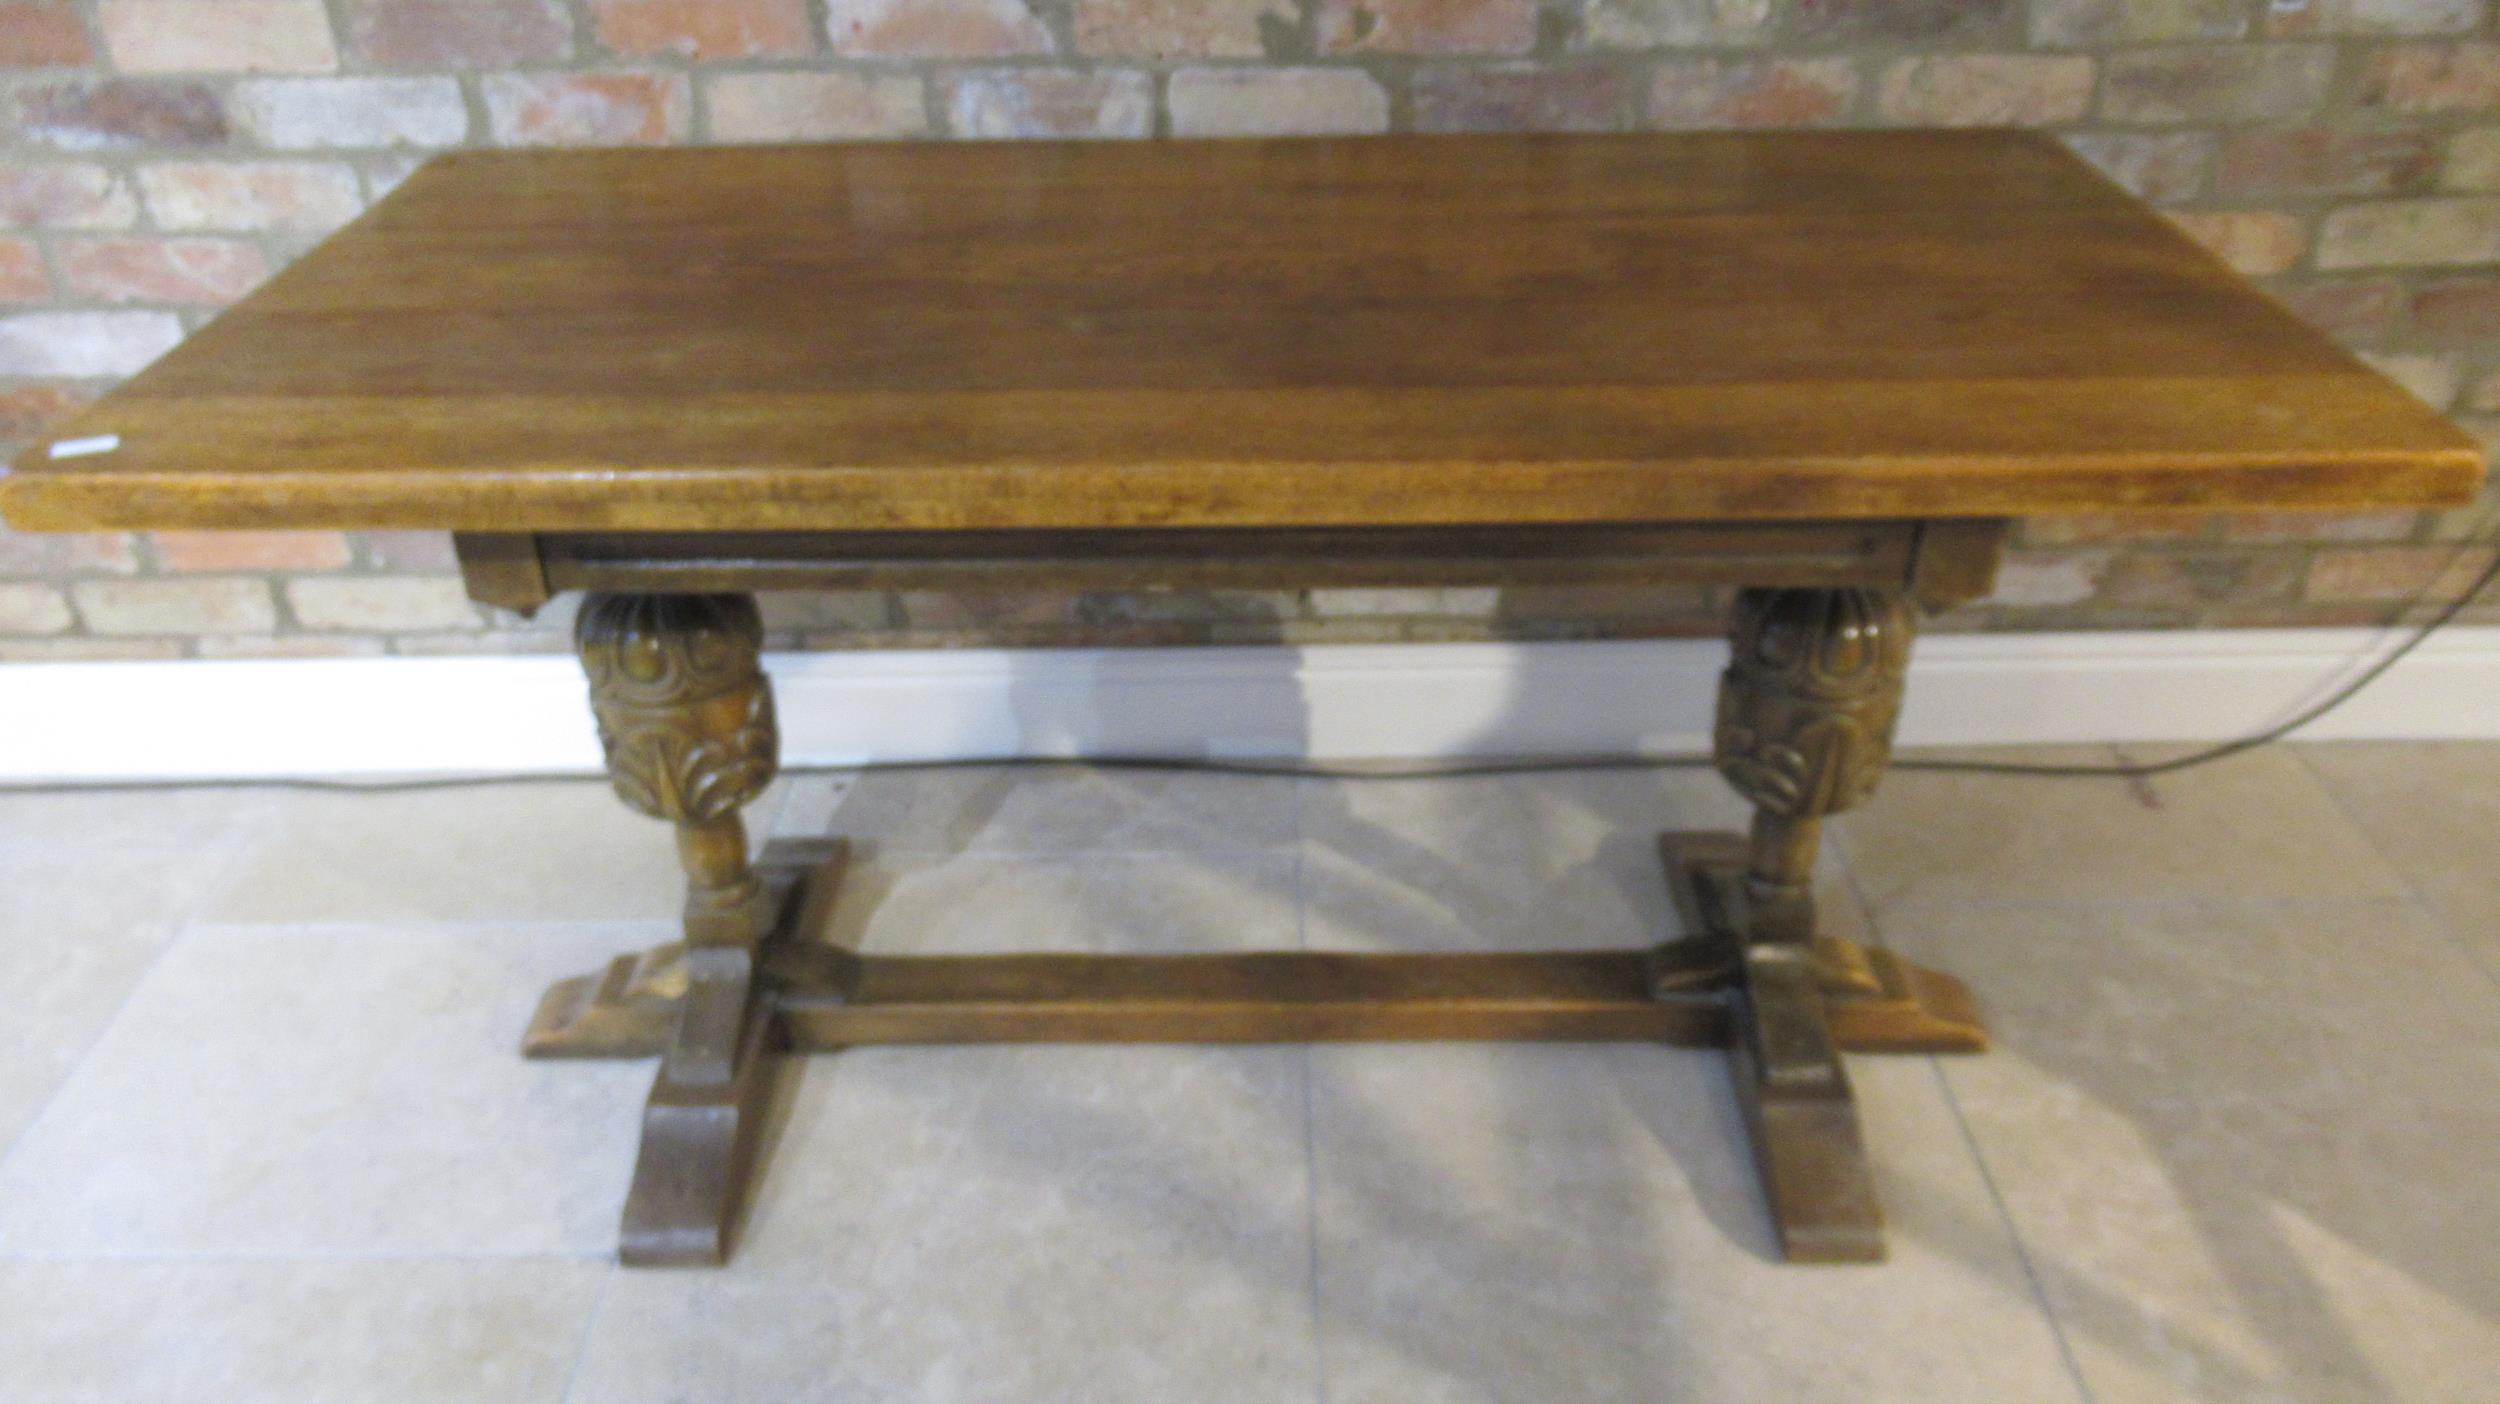 A 1940's oak dining table - 152cm x 75cm - in good condition